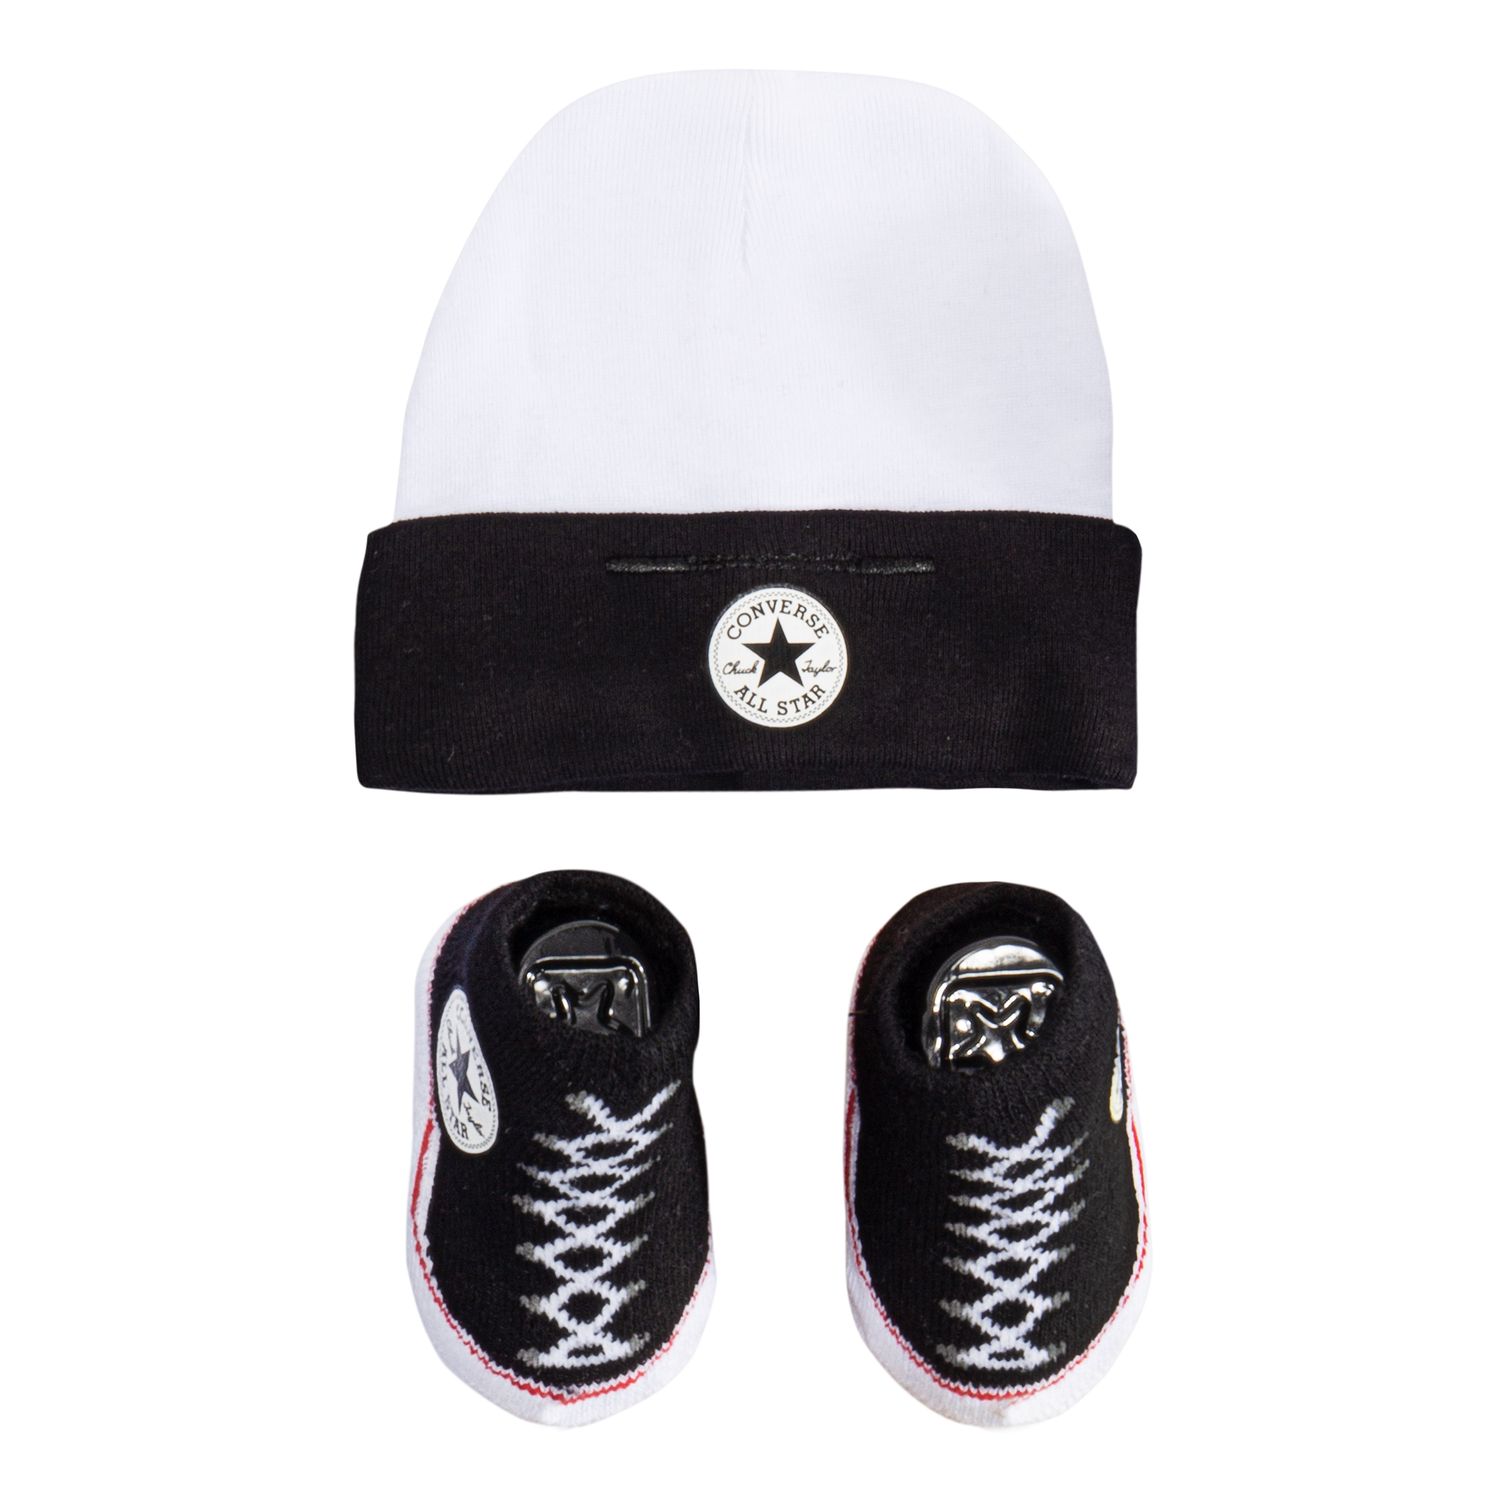 converse infant hat and booties